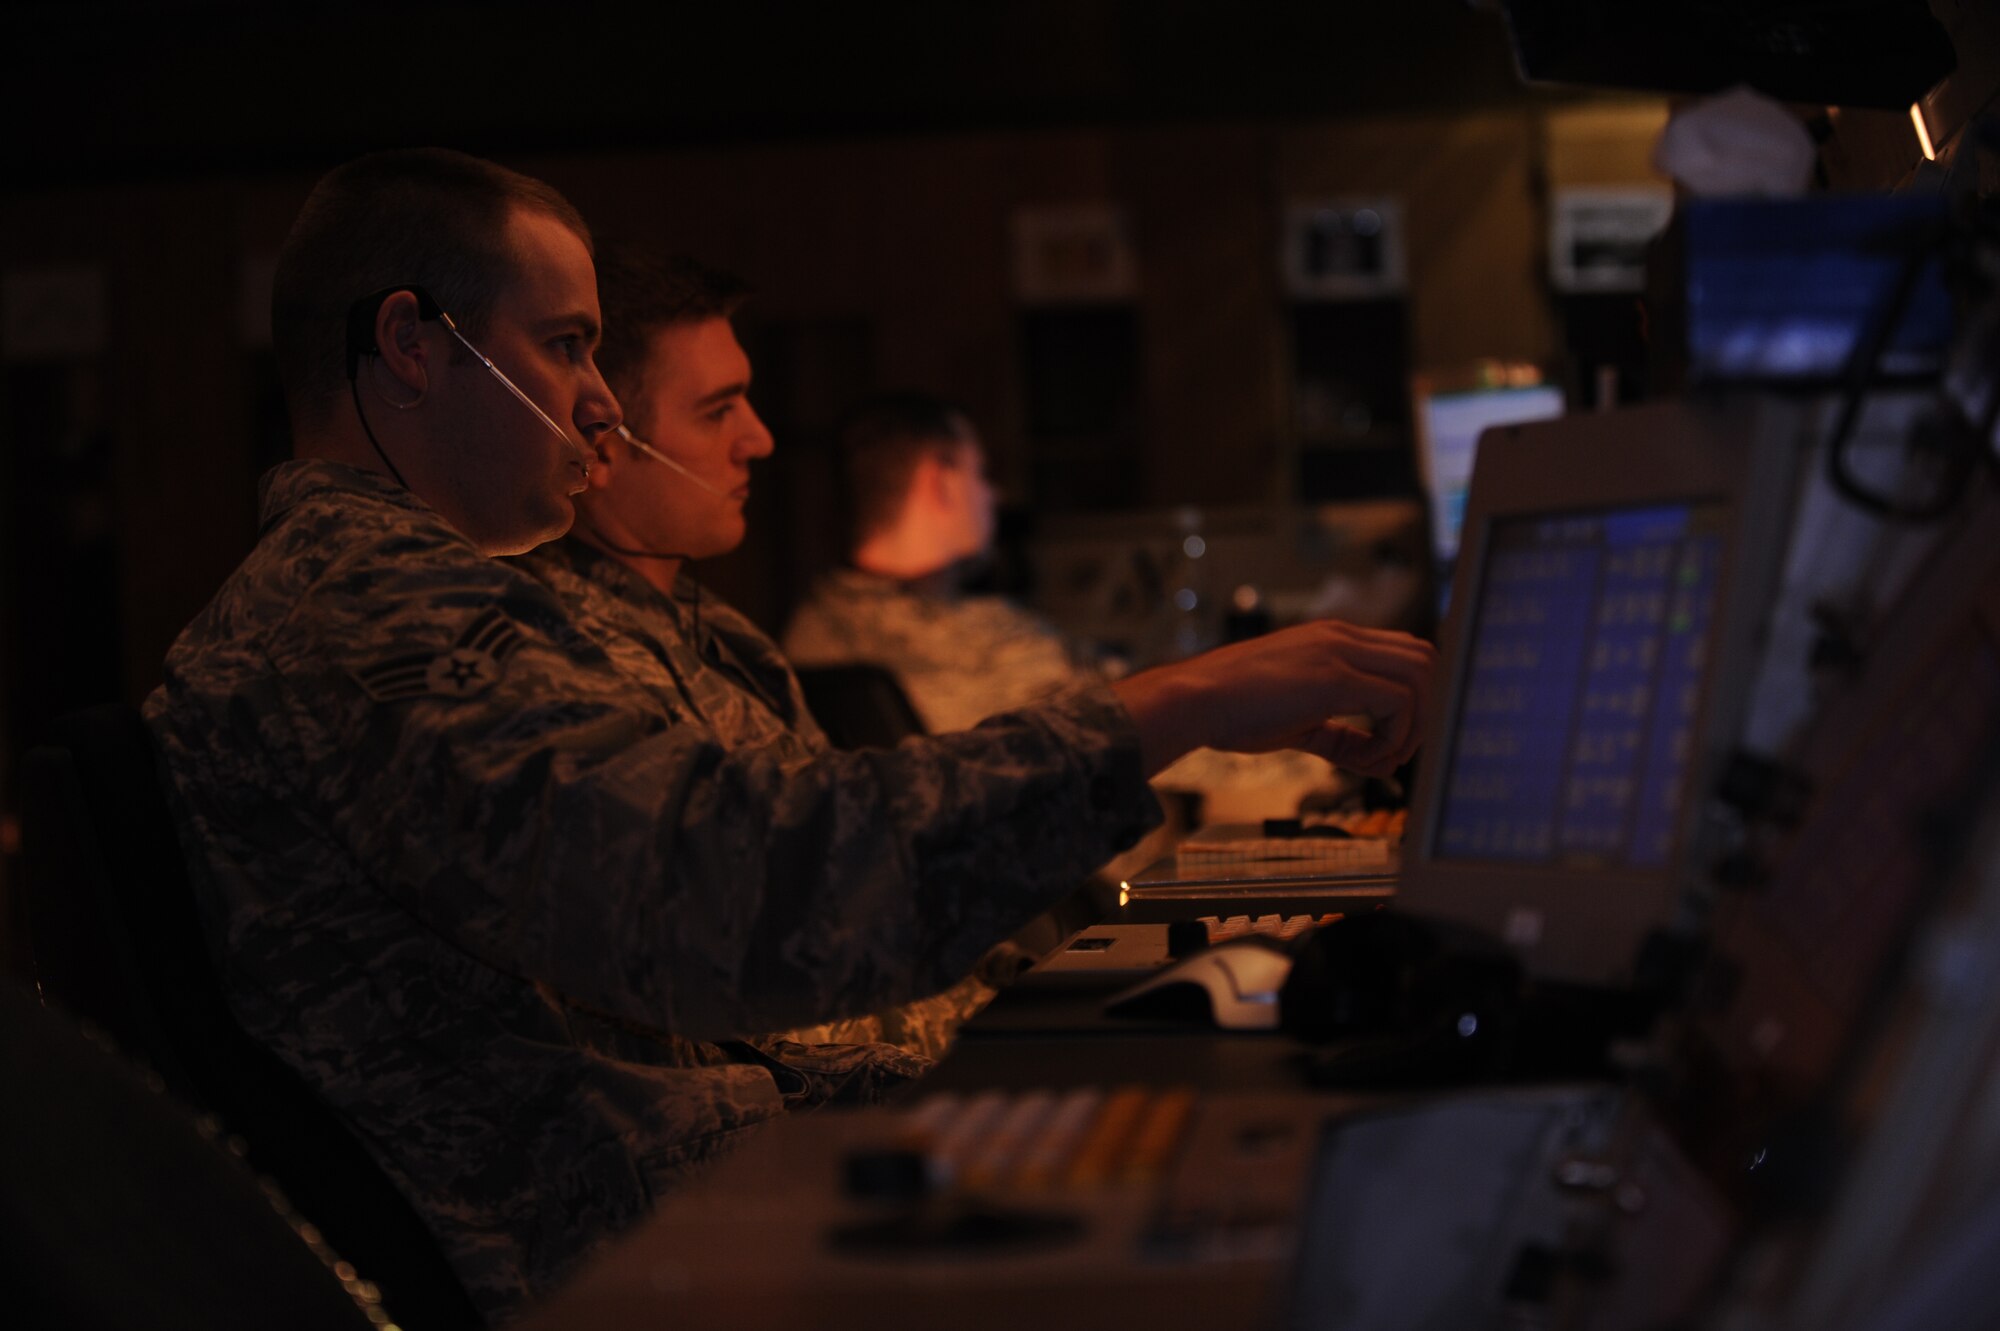 SPANGDAHLEM AIR BASE, Germany – Senior Airman Blake Sowder, left, and Staff Sgt. Steven Ott, 52nd Operations Support Squadron air-traffic controllers, monitor aircraft in the local airspace here at the ground radar office Nov. 8. The 52nd OSS Airfield Operations Flight earned an “Outstanding” rating on the Air Traffic System Evaluation Program inspection after demonstrating their ability to provide safe and efficient air-traffic service to the 52nd Fighter Wing and 726th Air Mobility Squadron. This is the first ATSEP “Outstanding” rating in the past five years given to a unit within U.S. Air Forces in Europe. (U.S. Air Force photo/Airman 1st Class Matthew B. Fredericks)